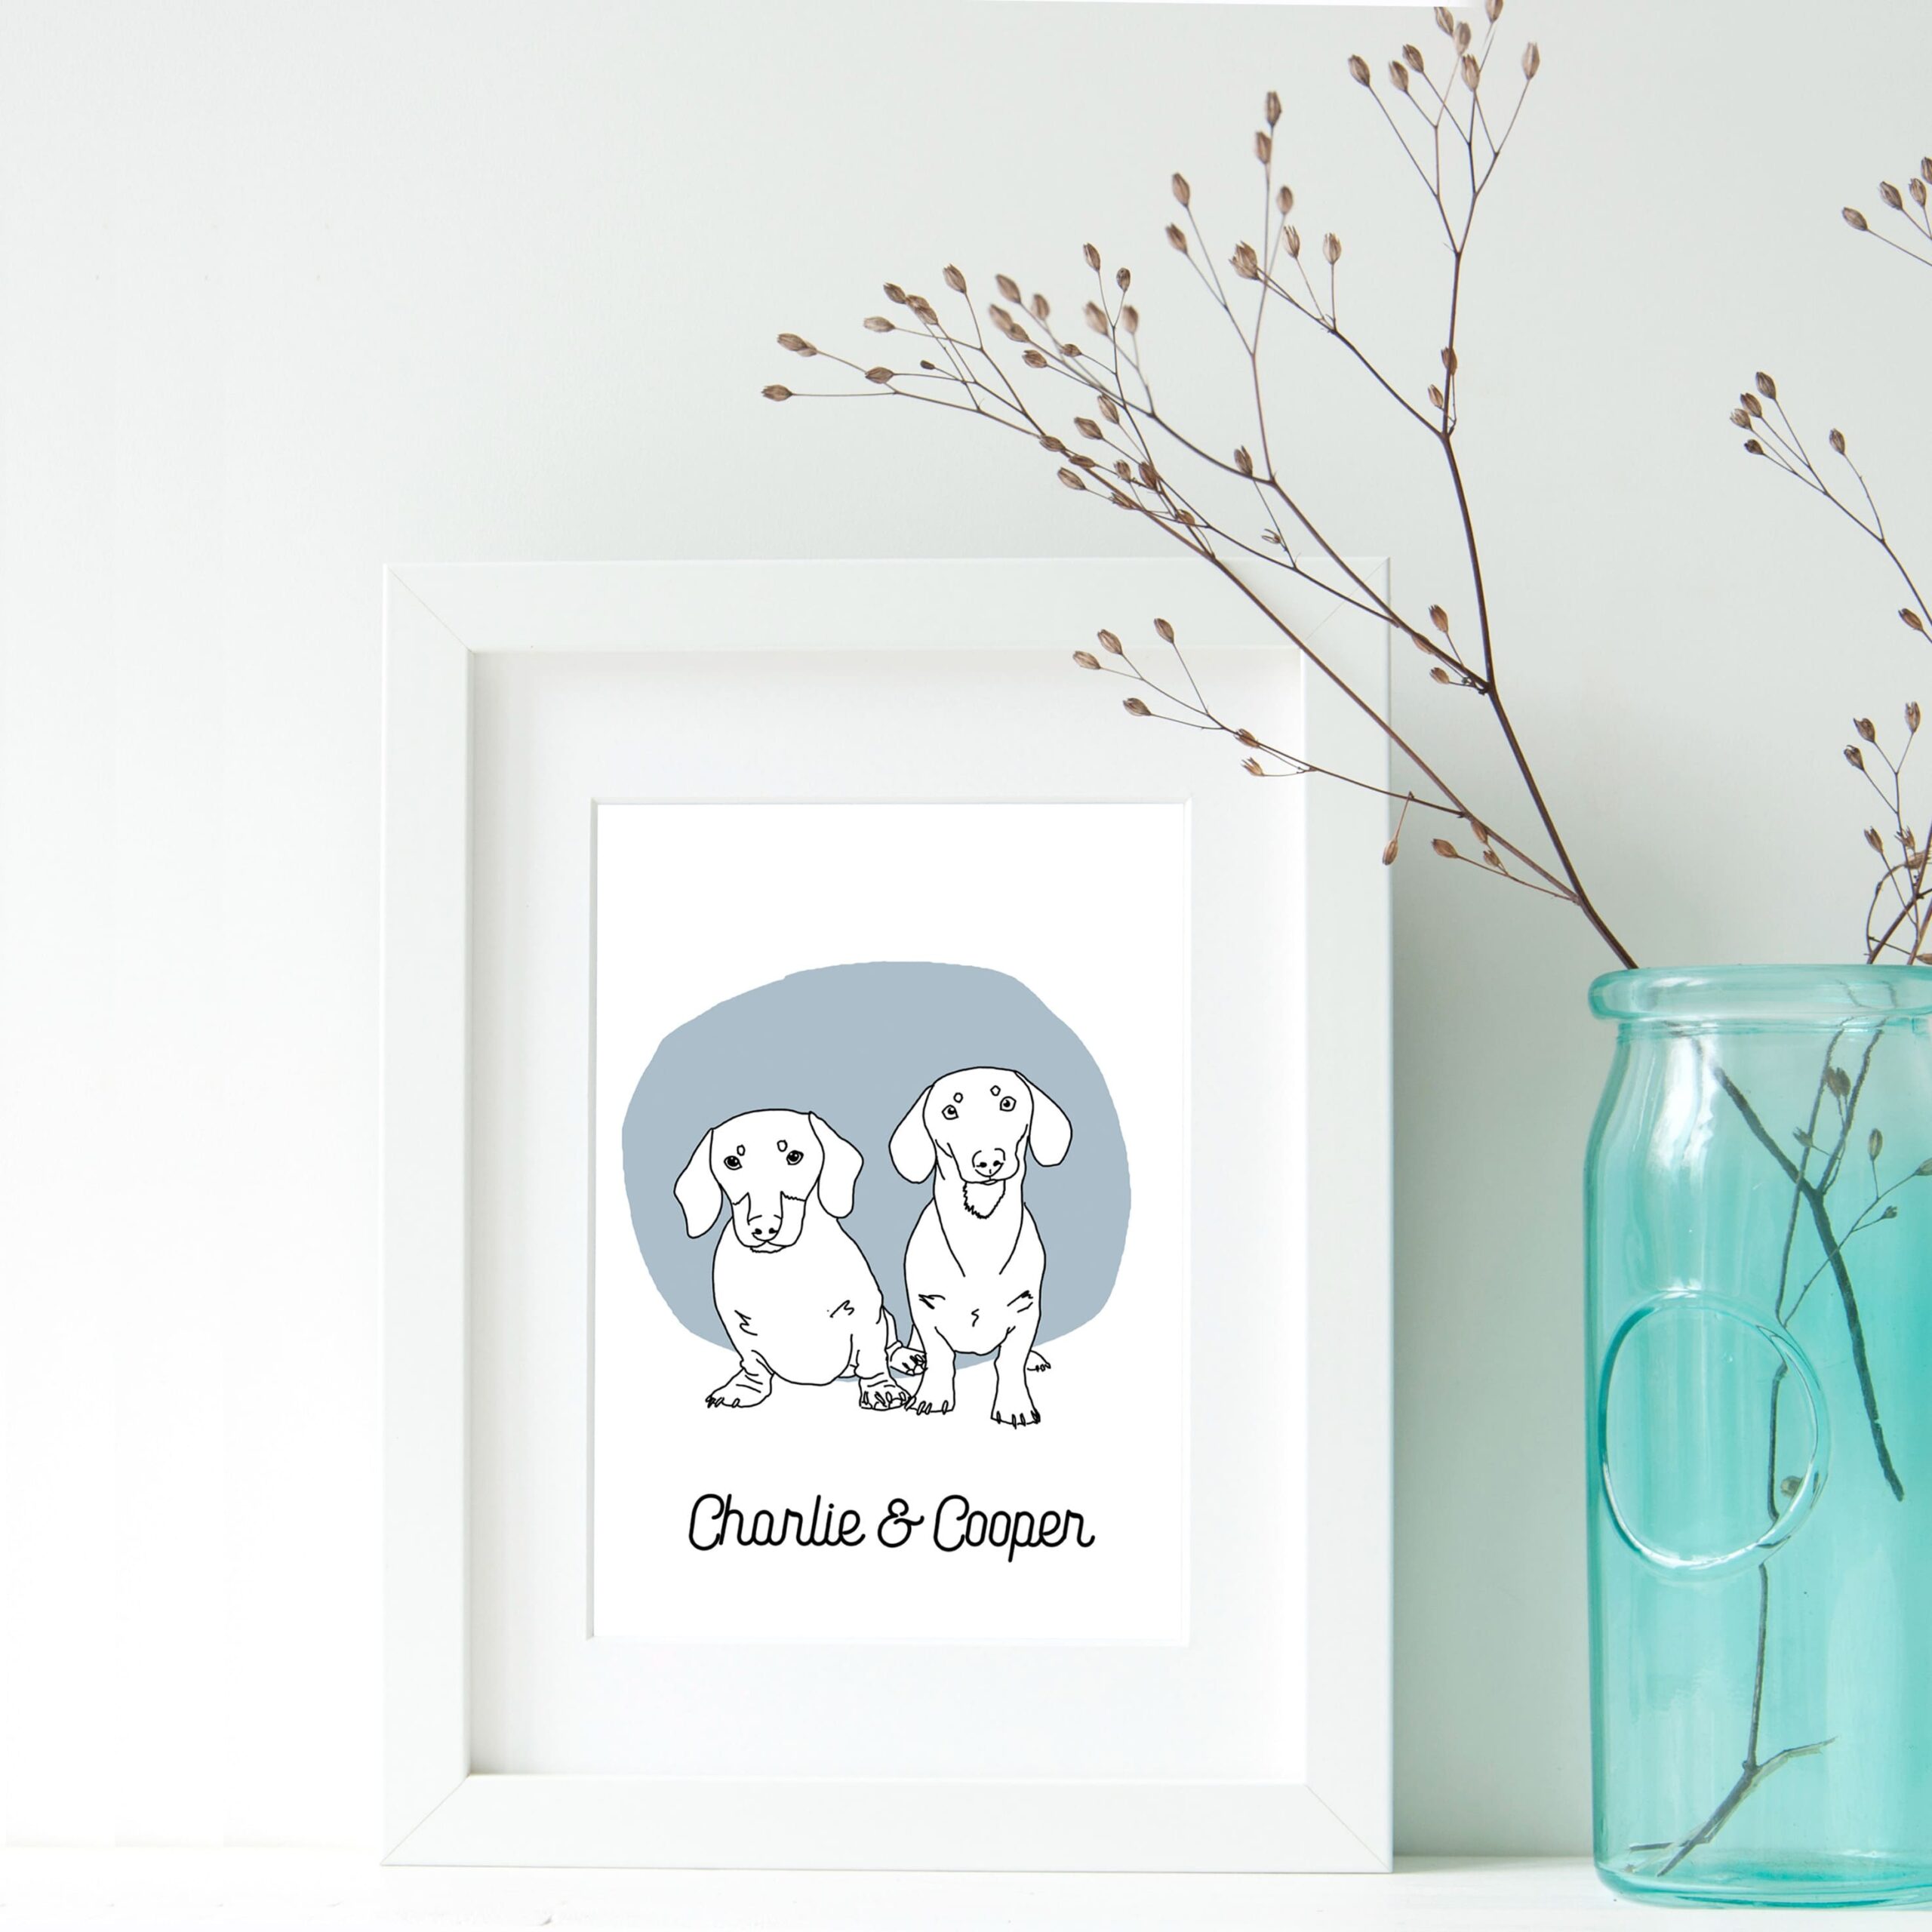 custom pet portrait with their names in fashion line art illustration style and color background of your choice